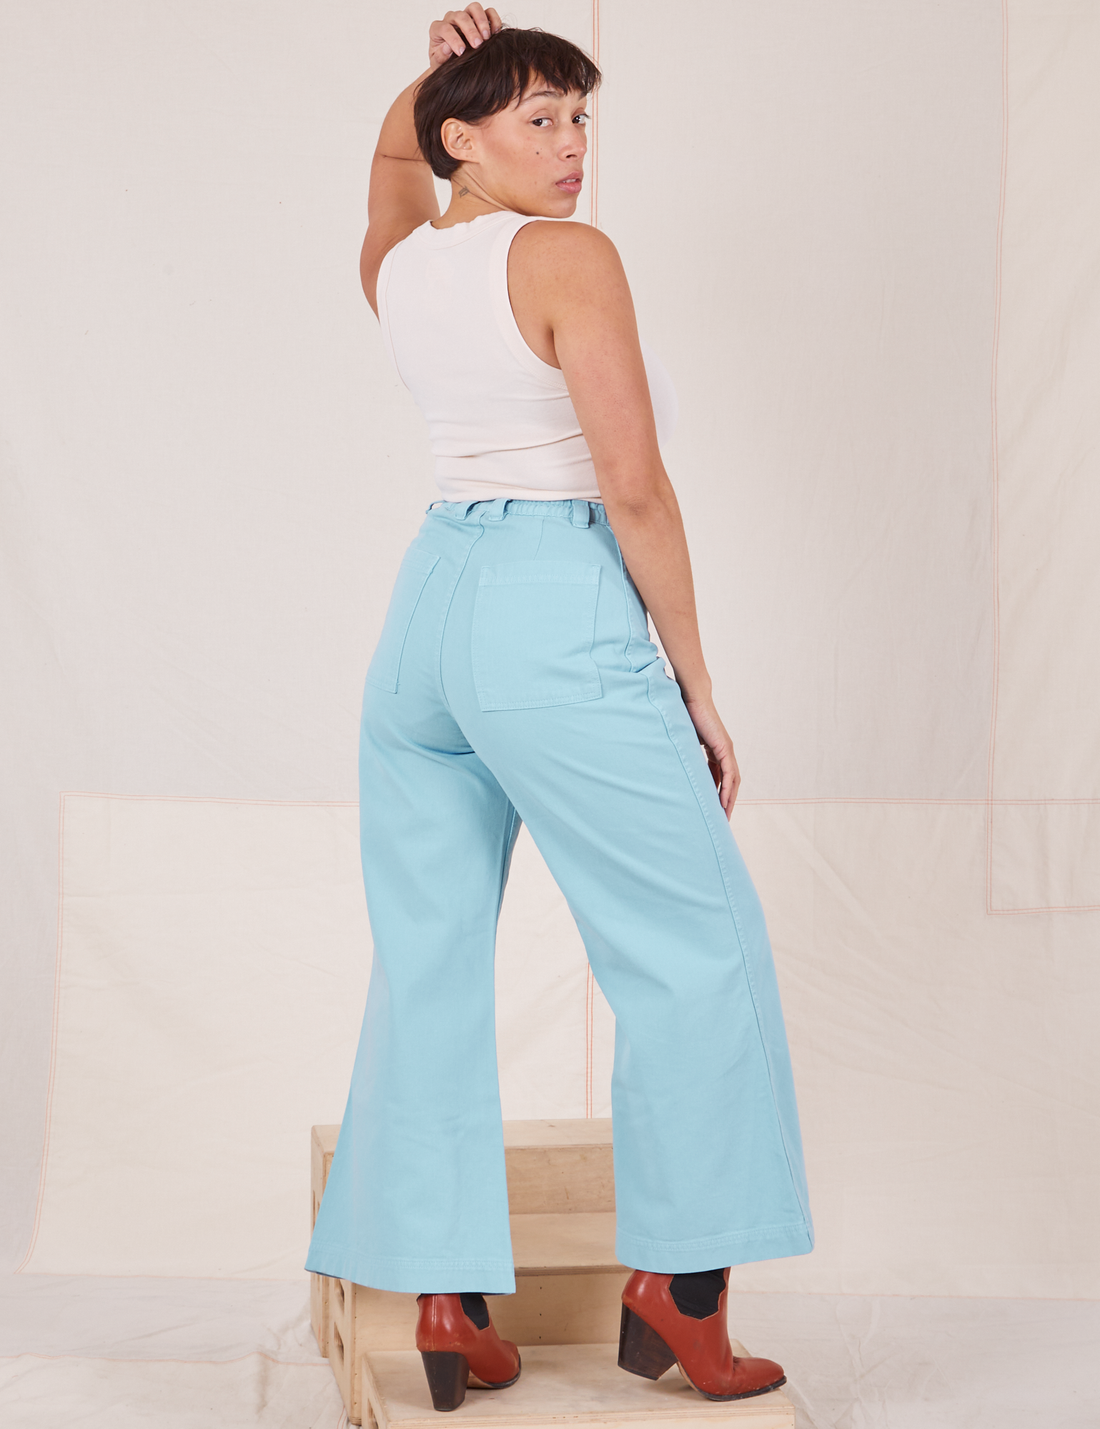 Back view of Bell Bottoms in Baby Blue and vintage off-white Tank Top worn by Tiara